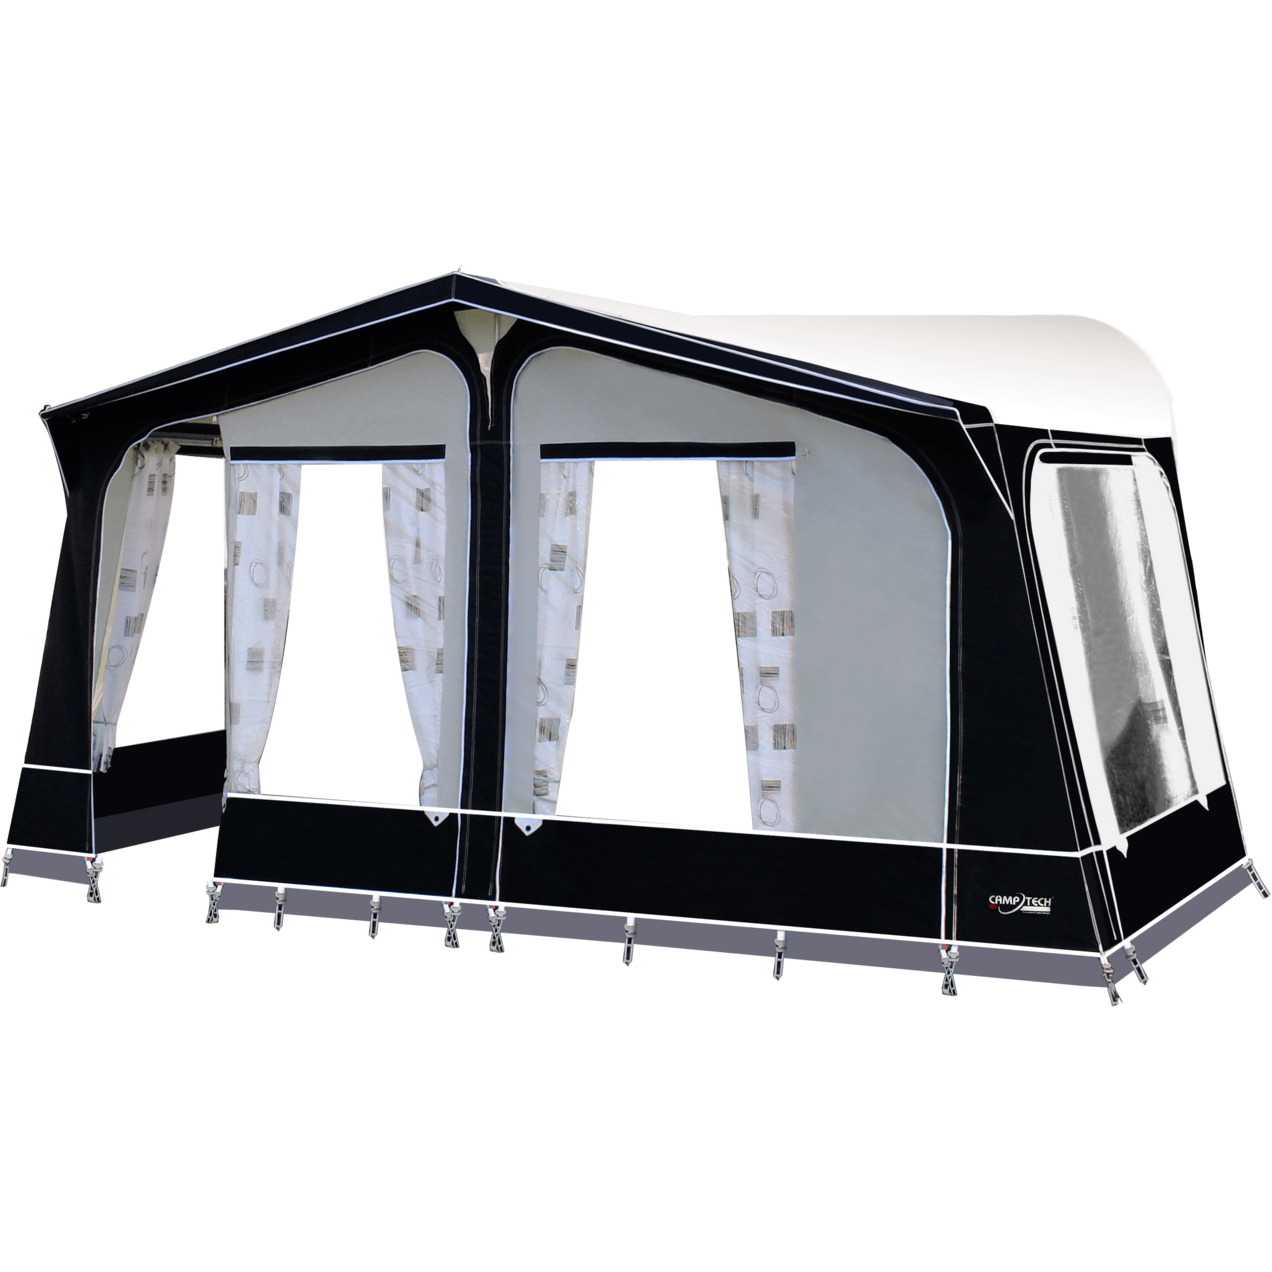 Camptech Cayman Grey Touring Caravan Awning + FREE Storm Straps (2020) made by CampTech. A Caravan Awning sold by Quality Caravan Awnings